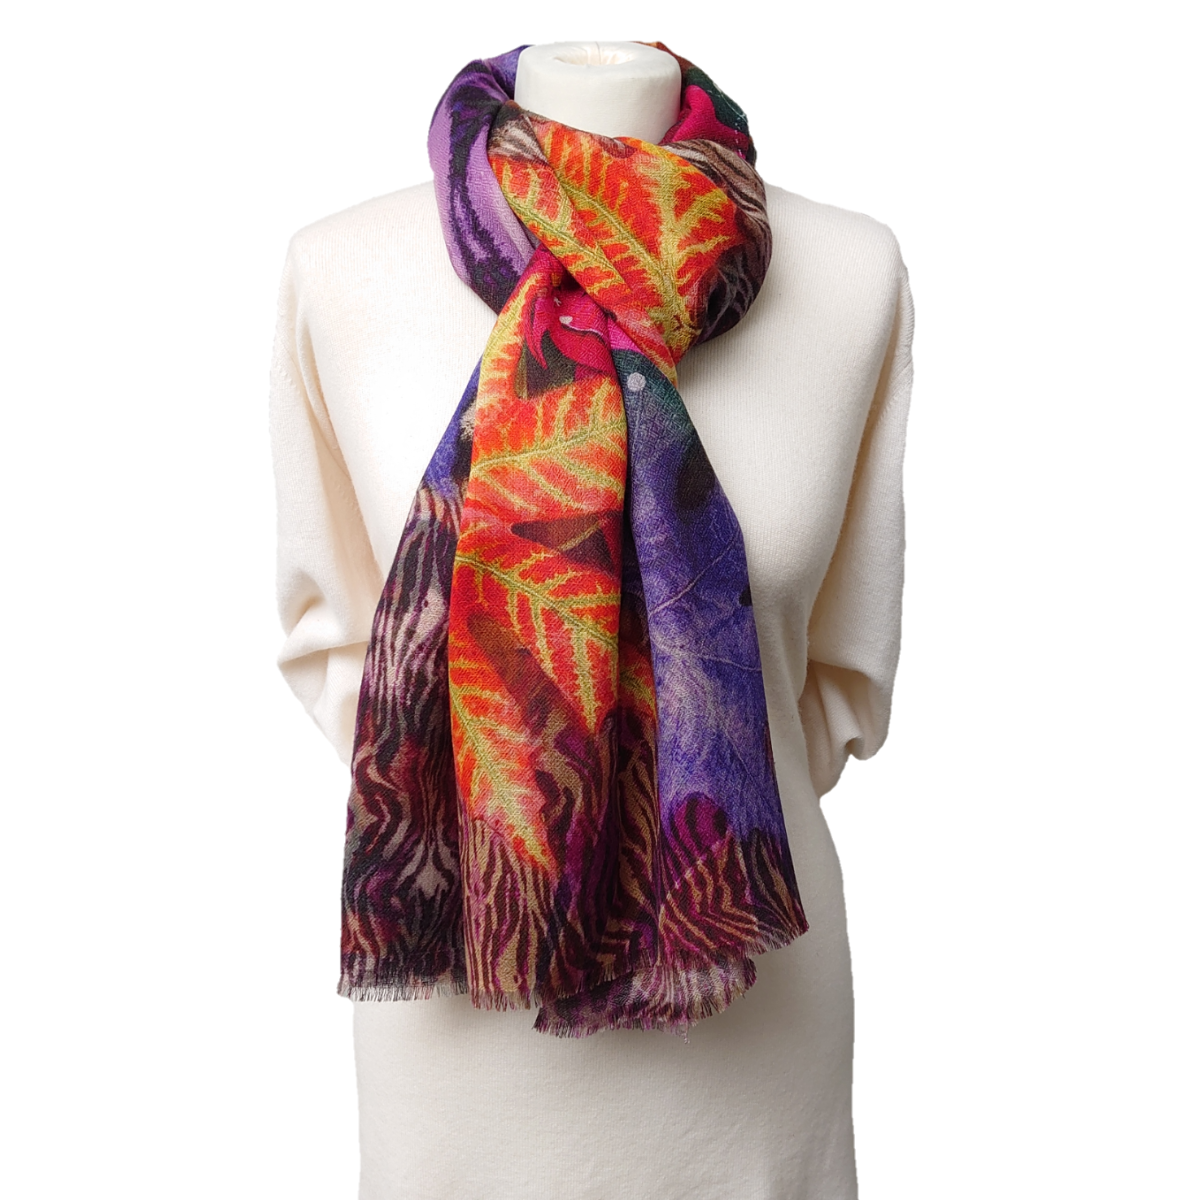 Ltd Edition 100% Pure Pashmina Cashmere Stole - Large Scarf - Flowers, Leaves And Bark Print